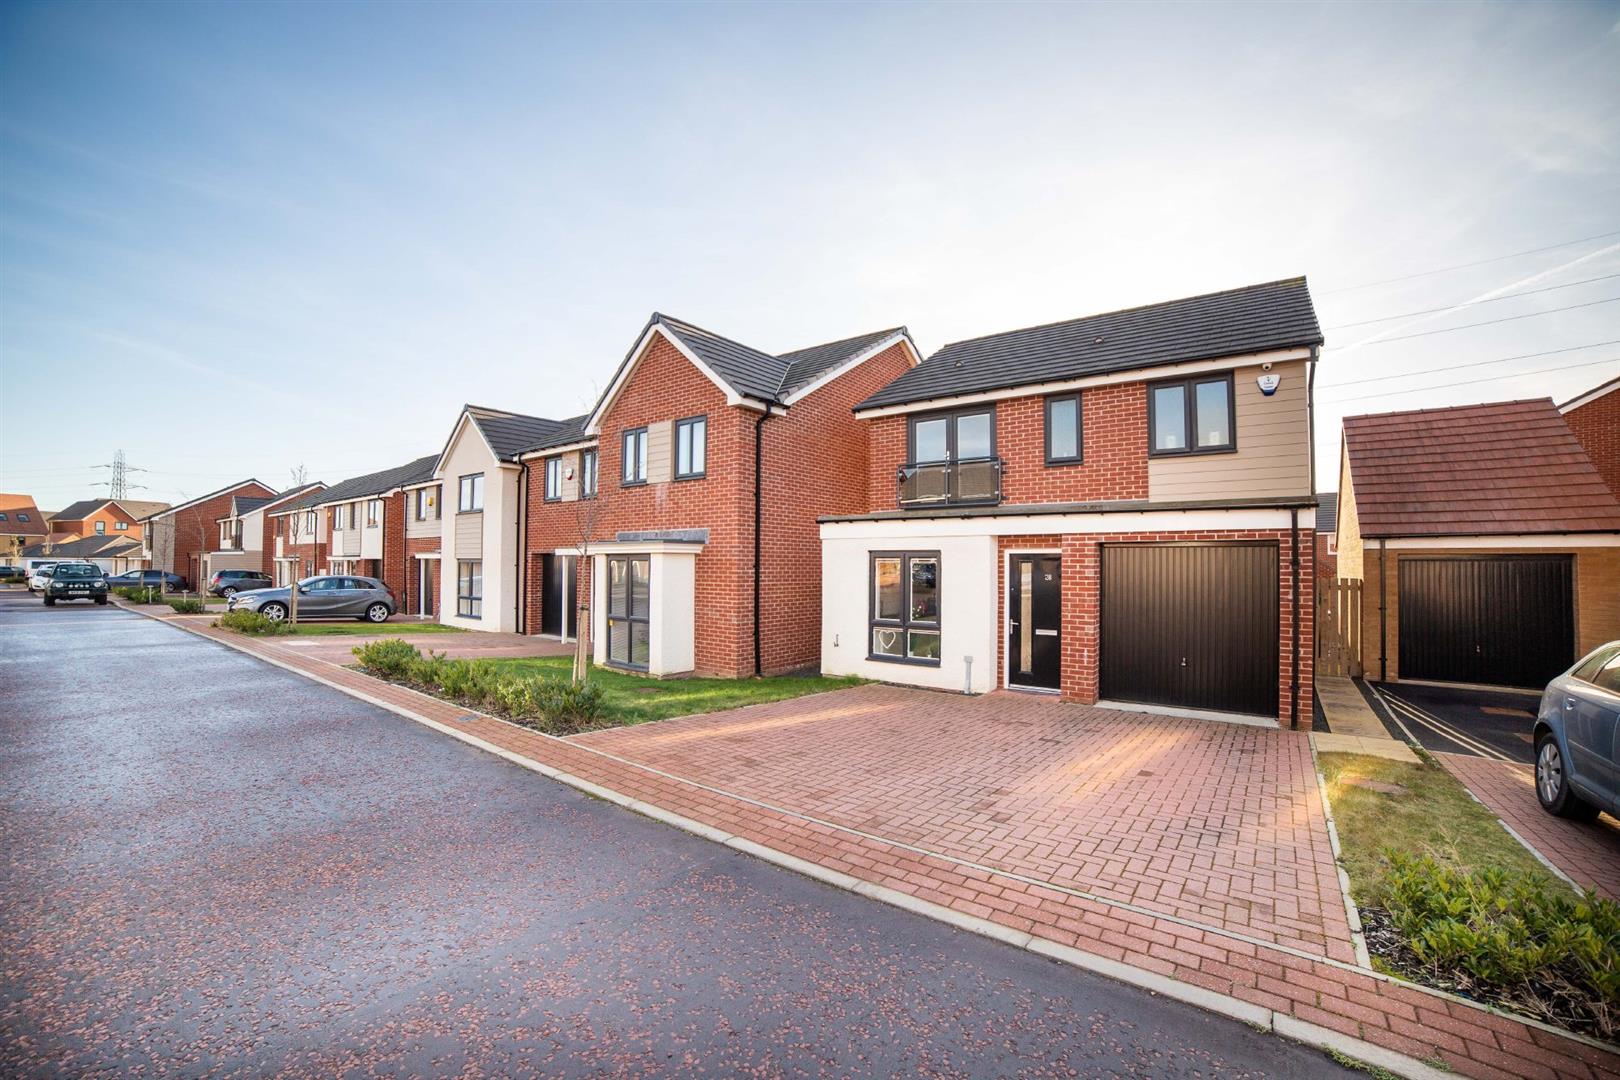 3 bed detached house for sale in Bridget Gardens, Great Park  - Property Image 1